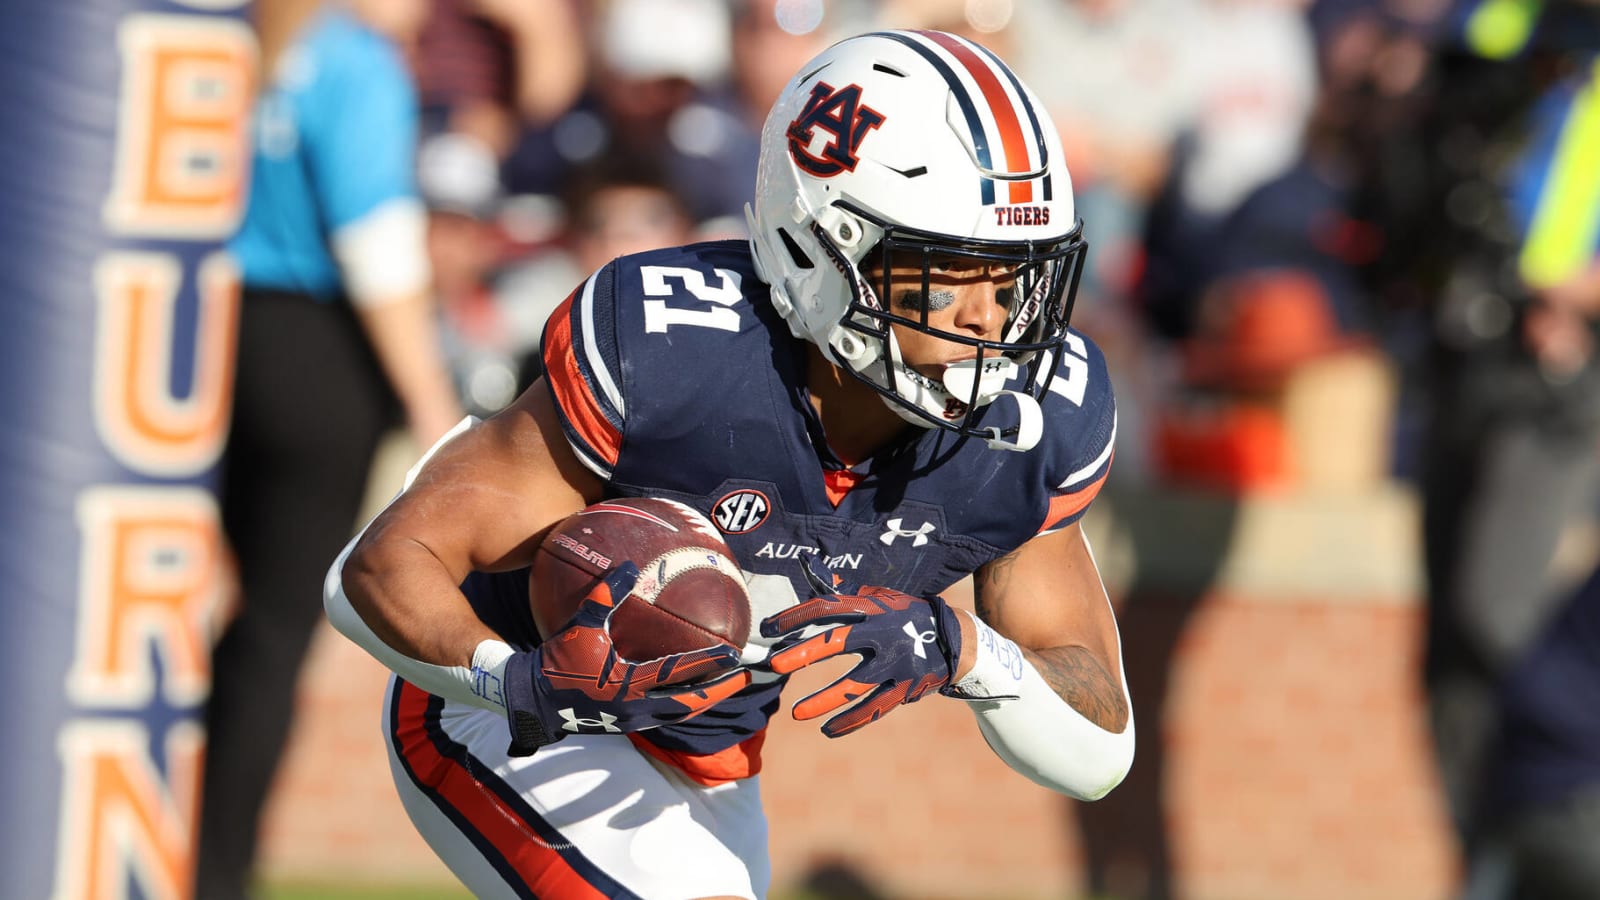 Report: Auburn running back in critical condition after shooting